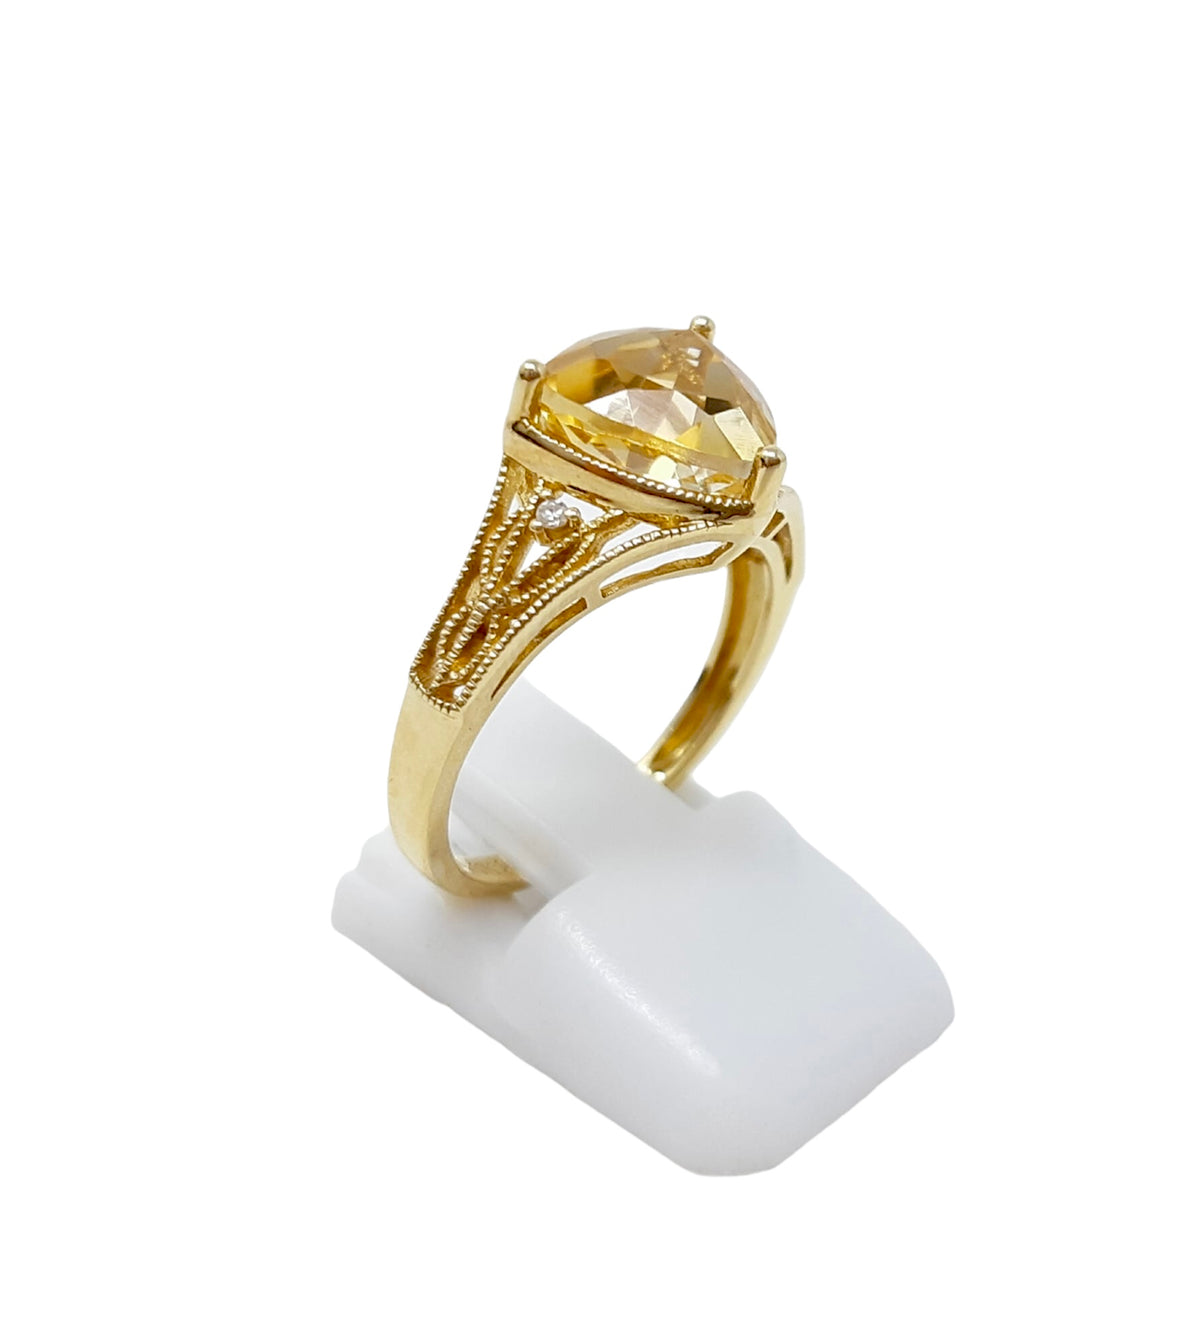 10K Yellow Gold Citrine and Diamond Ring, size 7